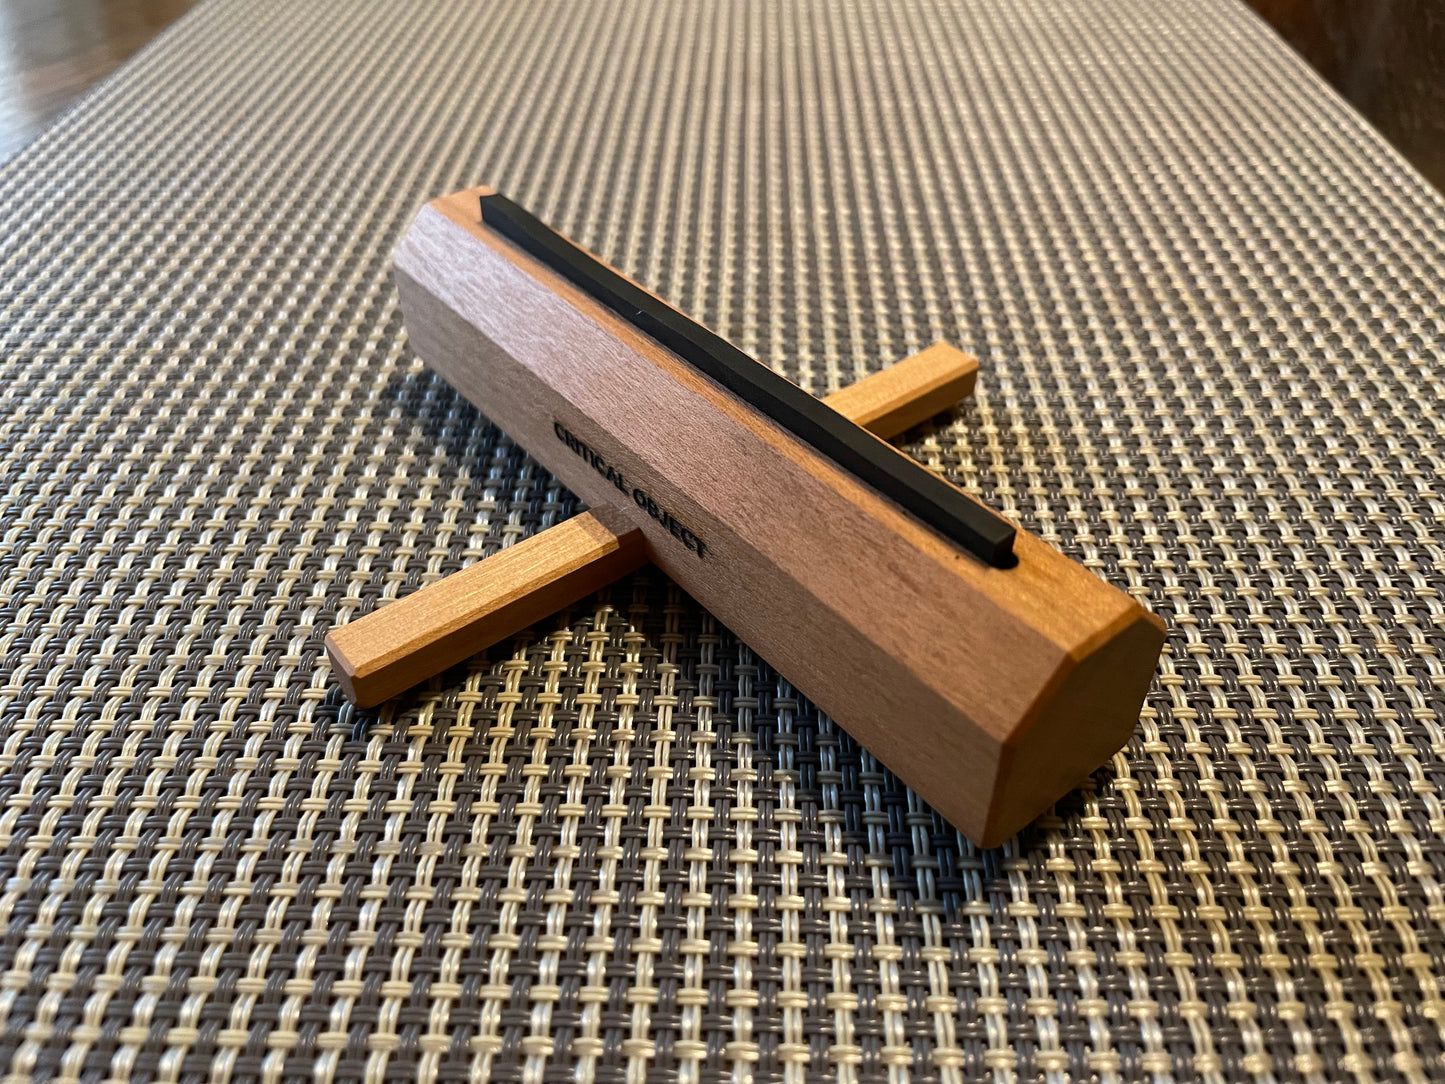 Portable knife stand